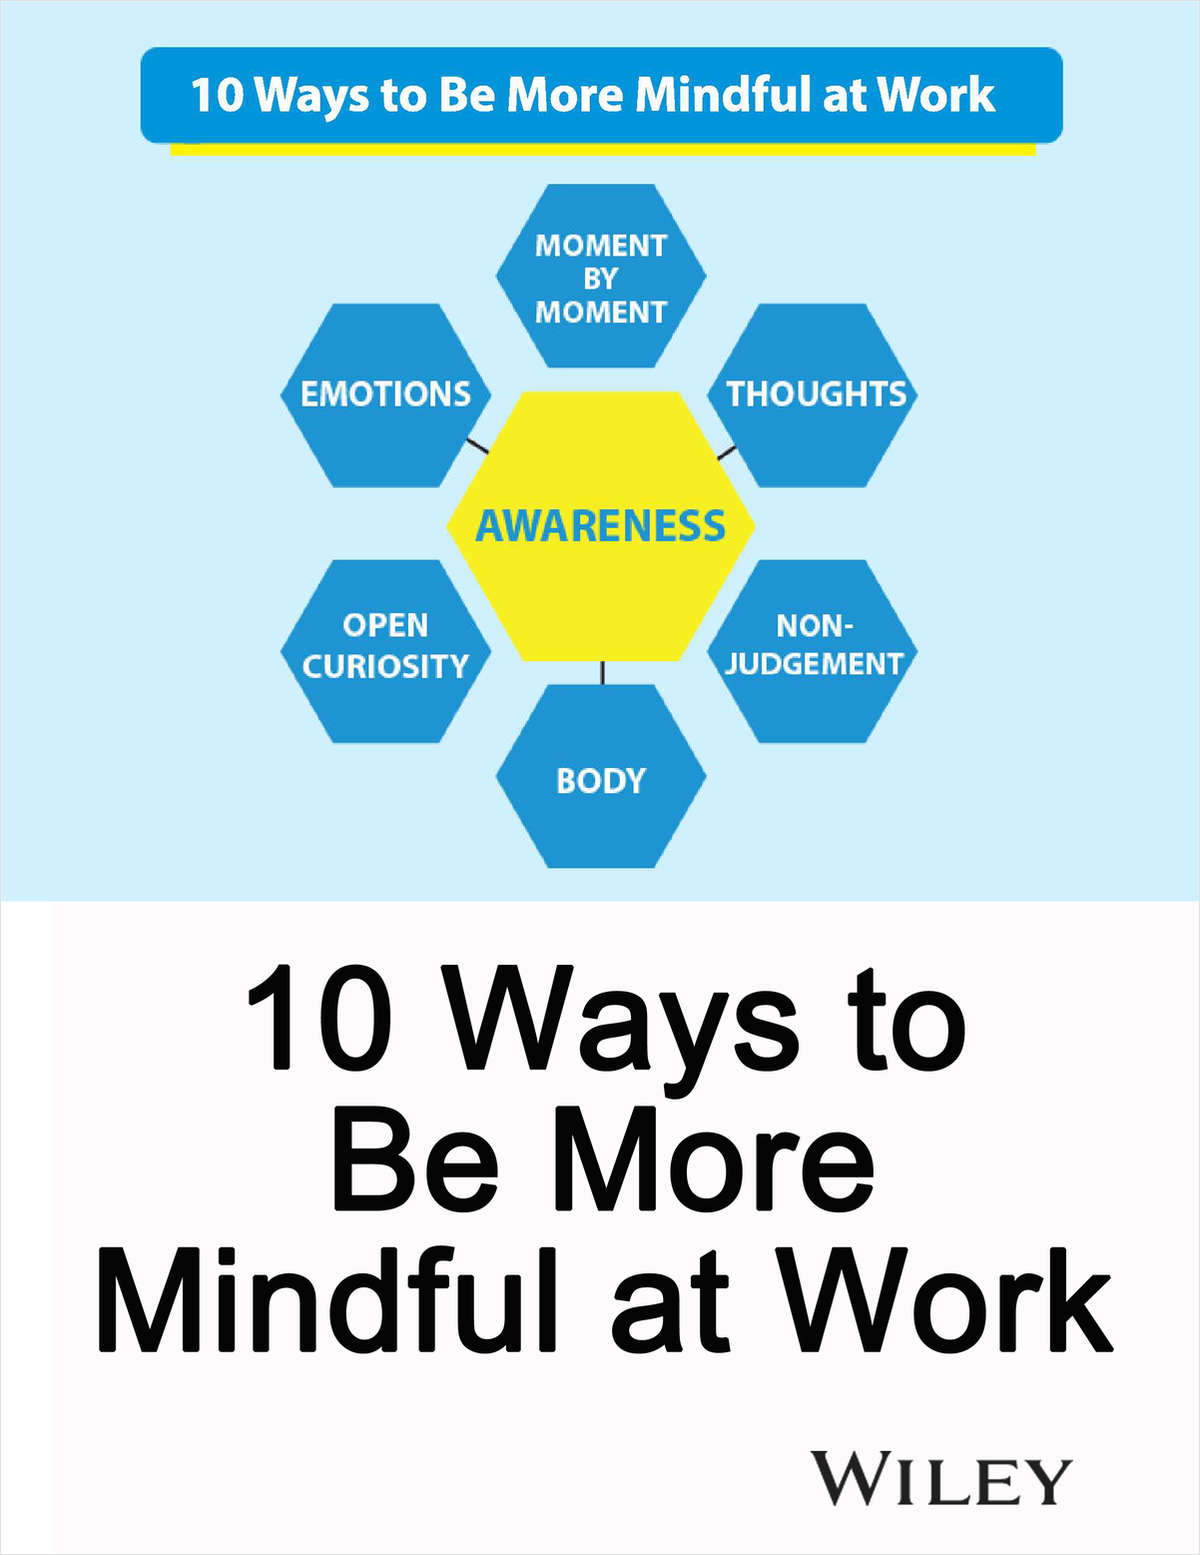 10 Ways to Be More Mindful at Work